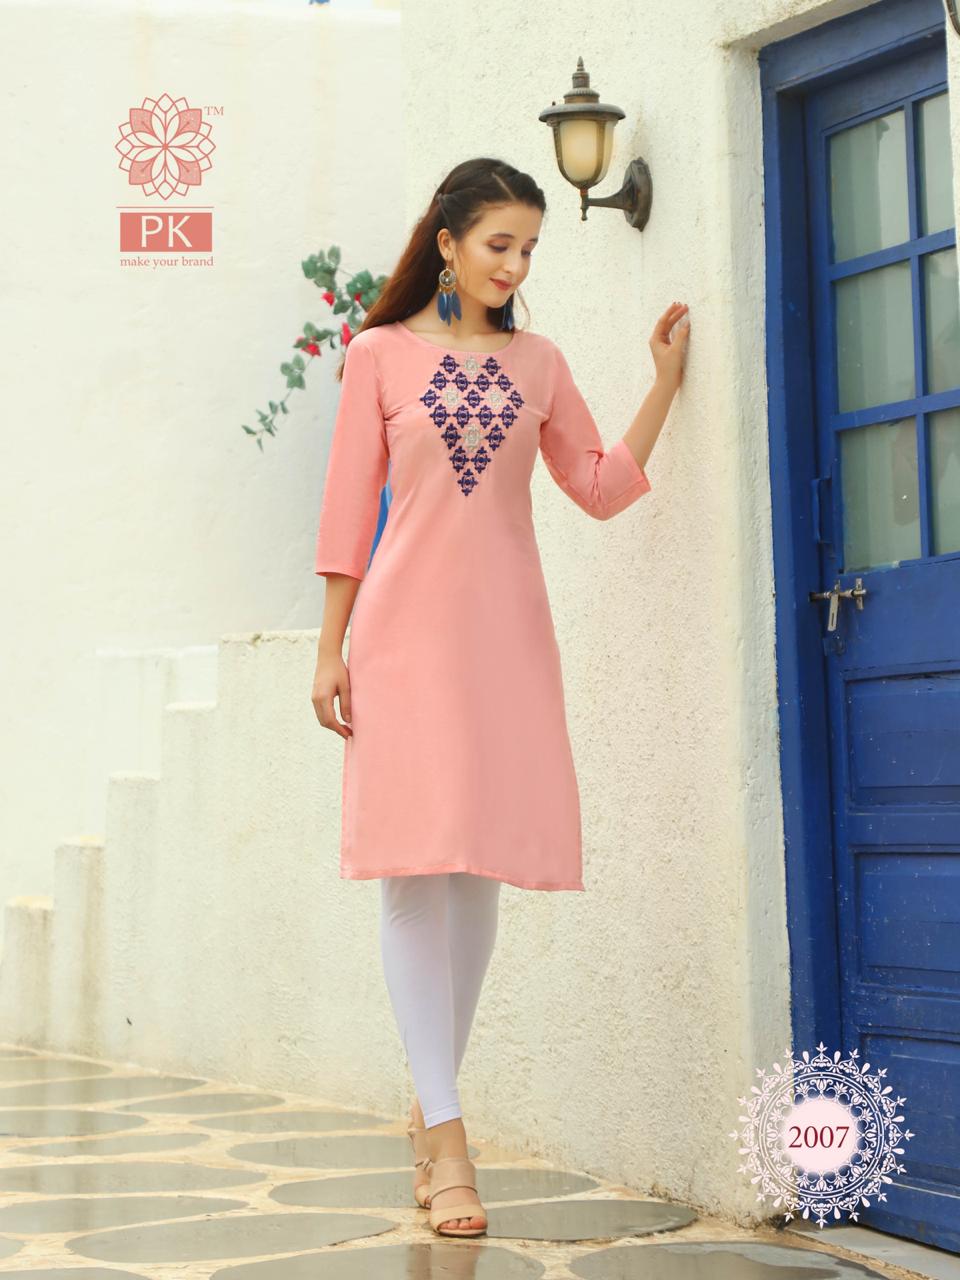 Best Clothing Brands In Pakistan 2018 - StyleGlow.com | Best clothing brands,  Pakistani women dresses, Famous clothes